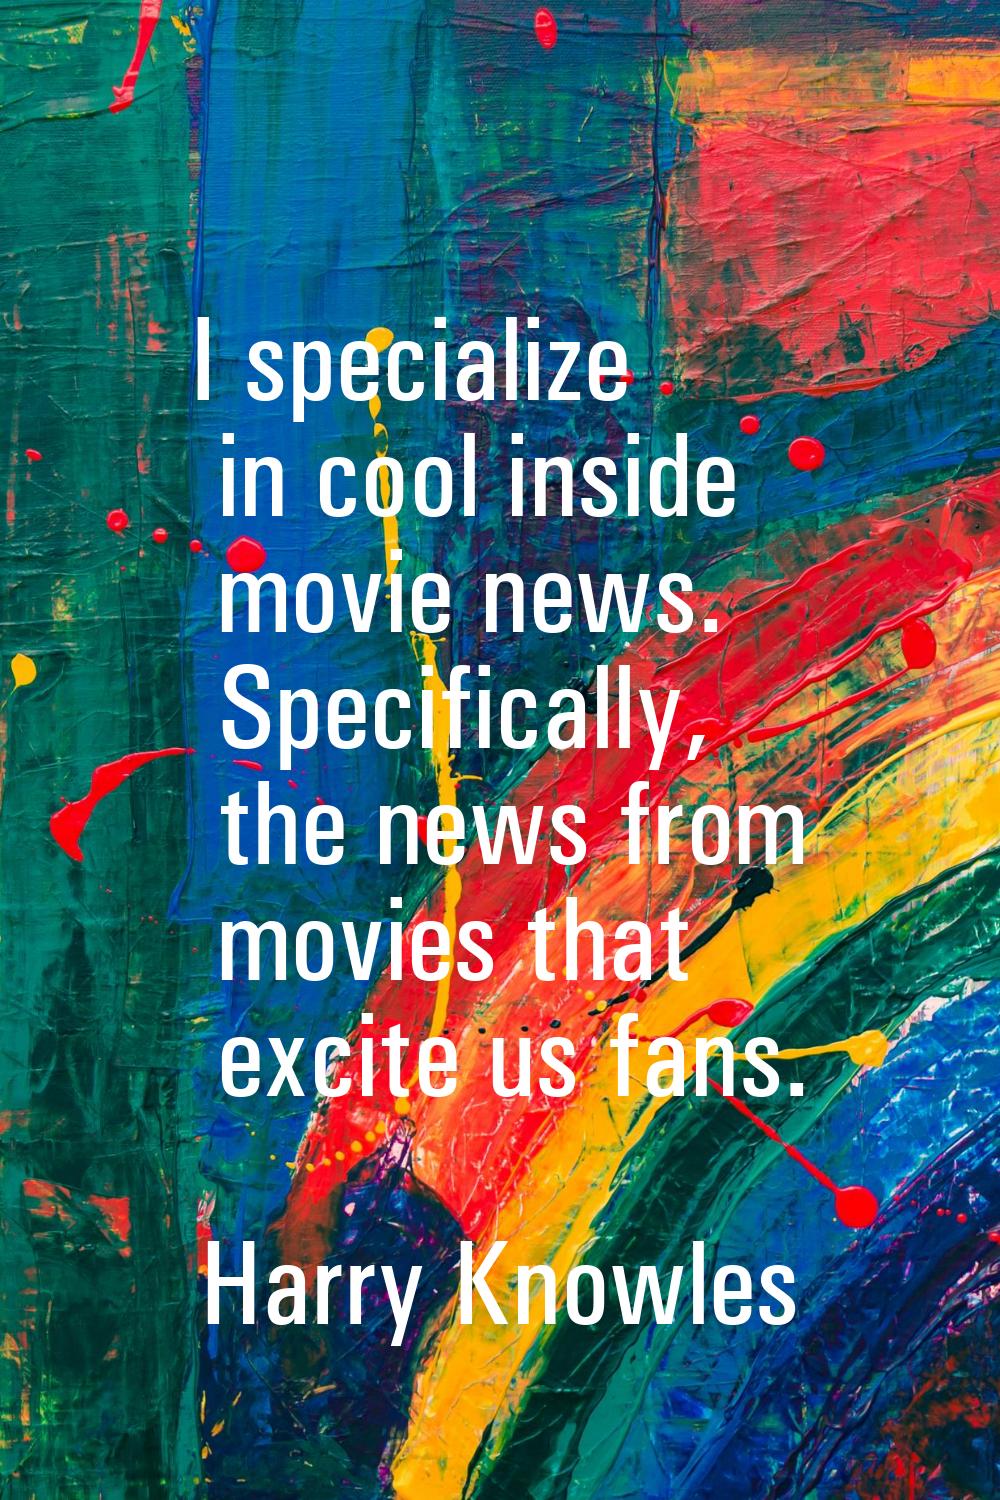 I specialize in cool inside movie news. Specifically, the news from movies that excite us fans.